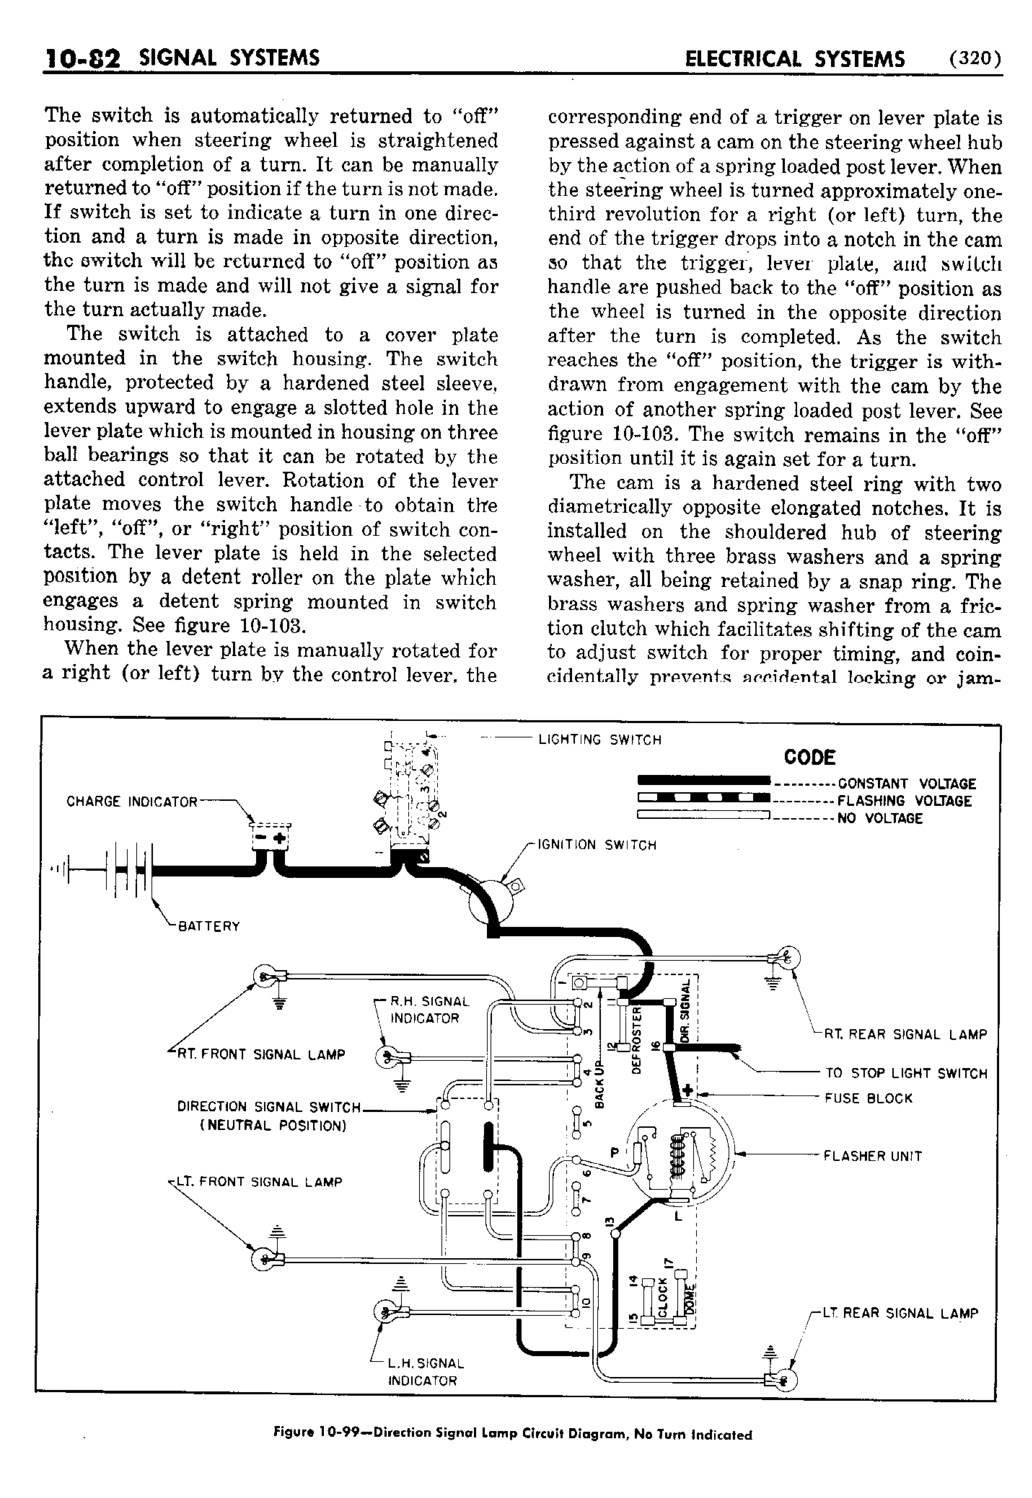 n_11 1950 Buick Shop Manual - Electrical Systems-082-082.jpg